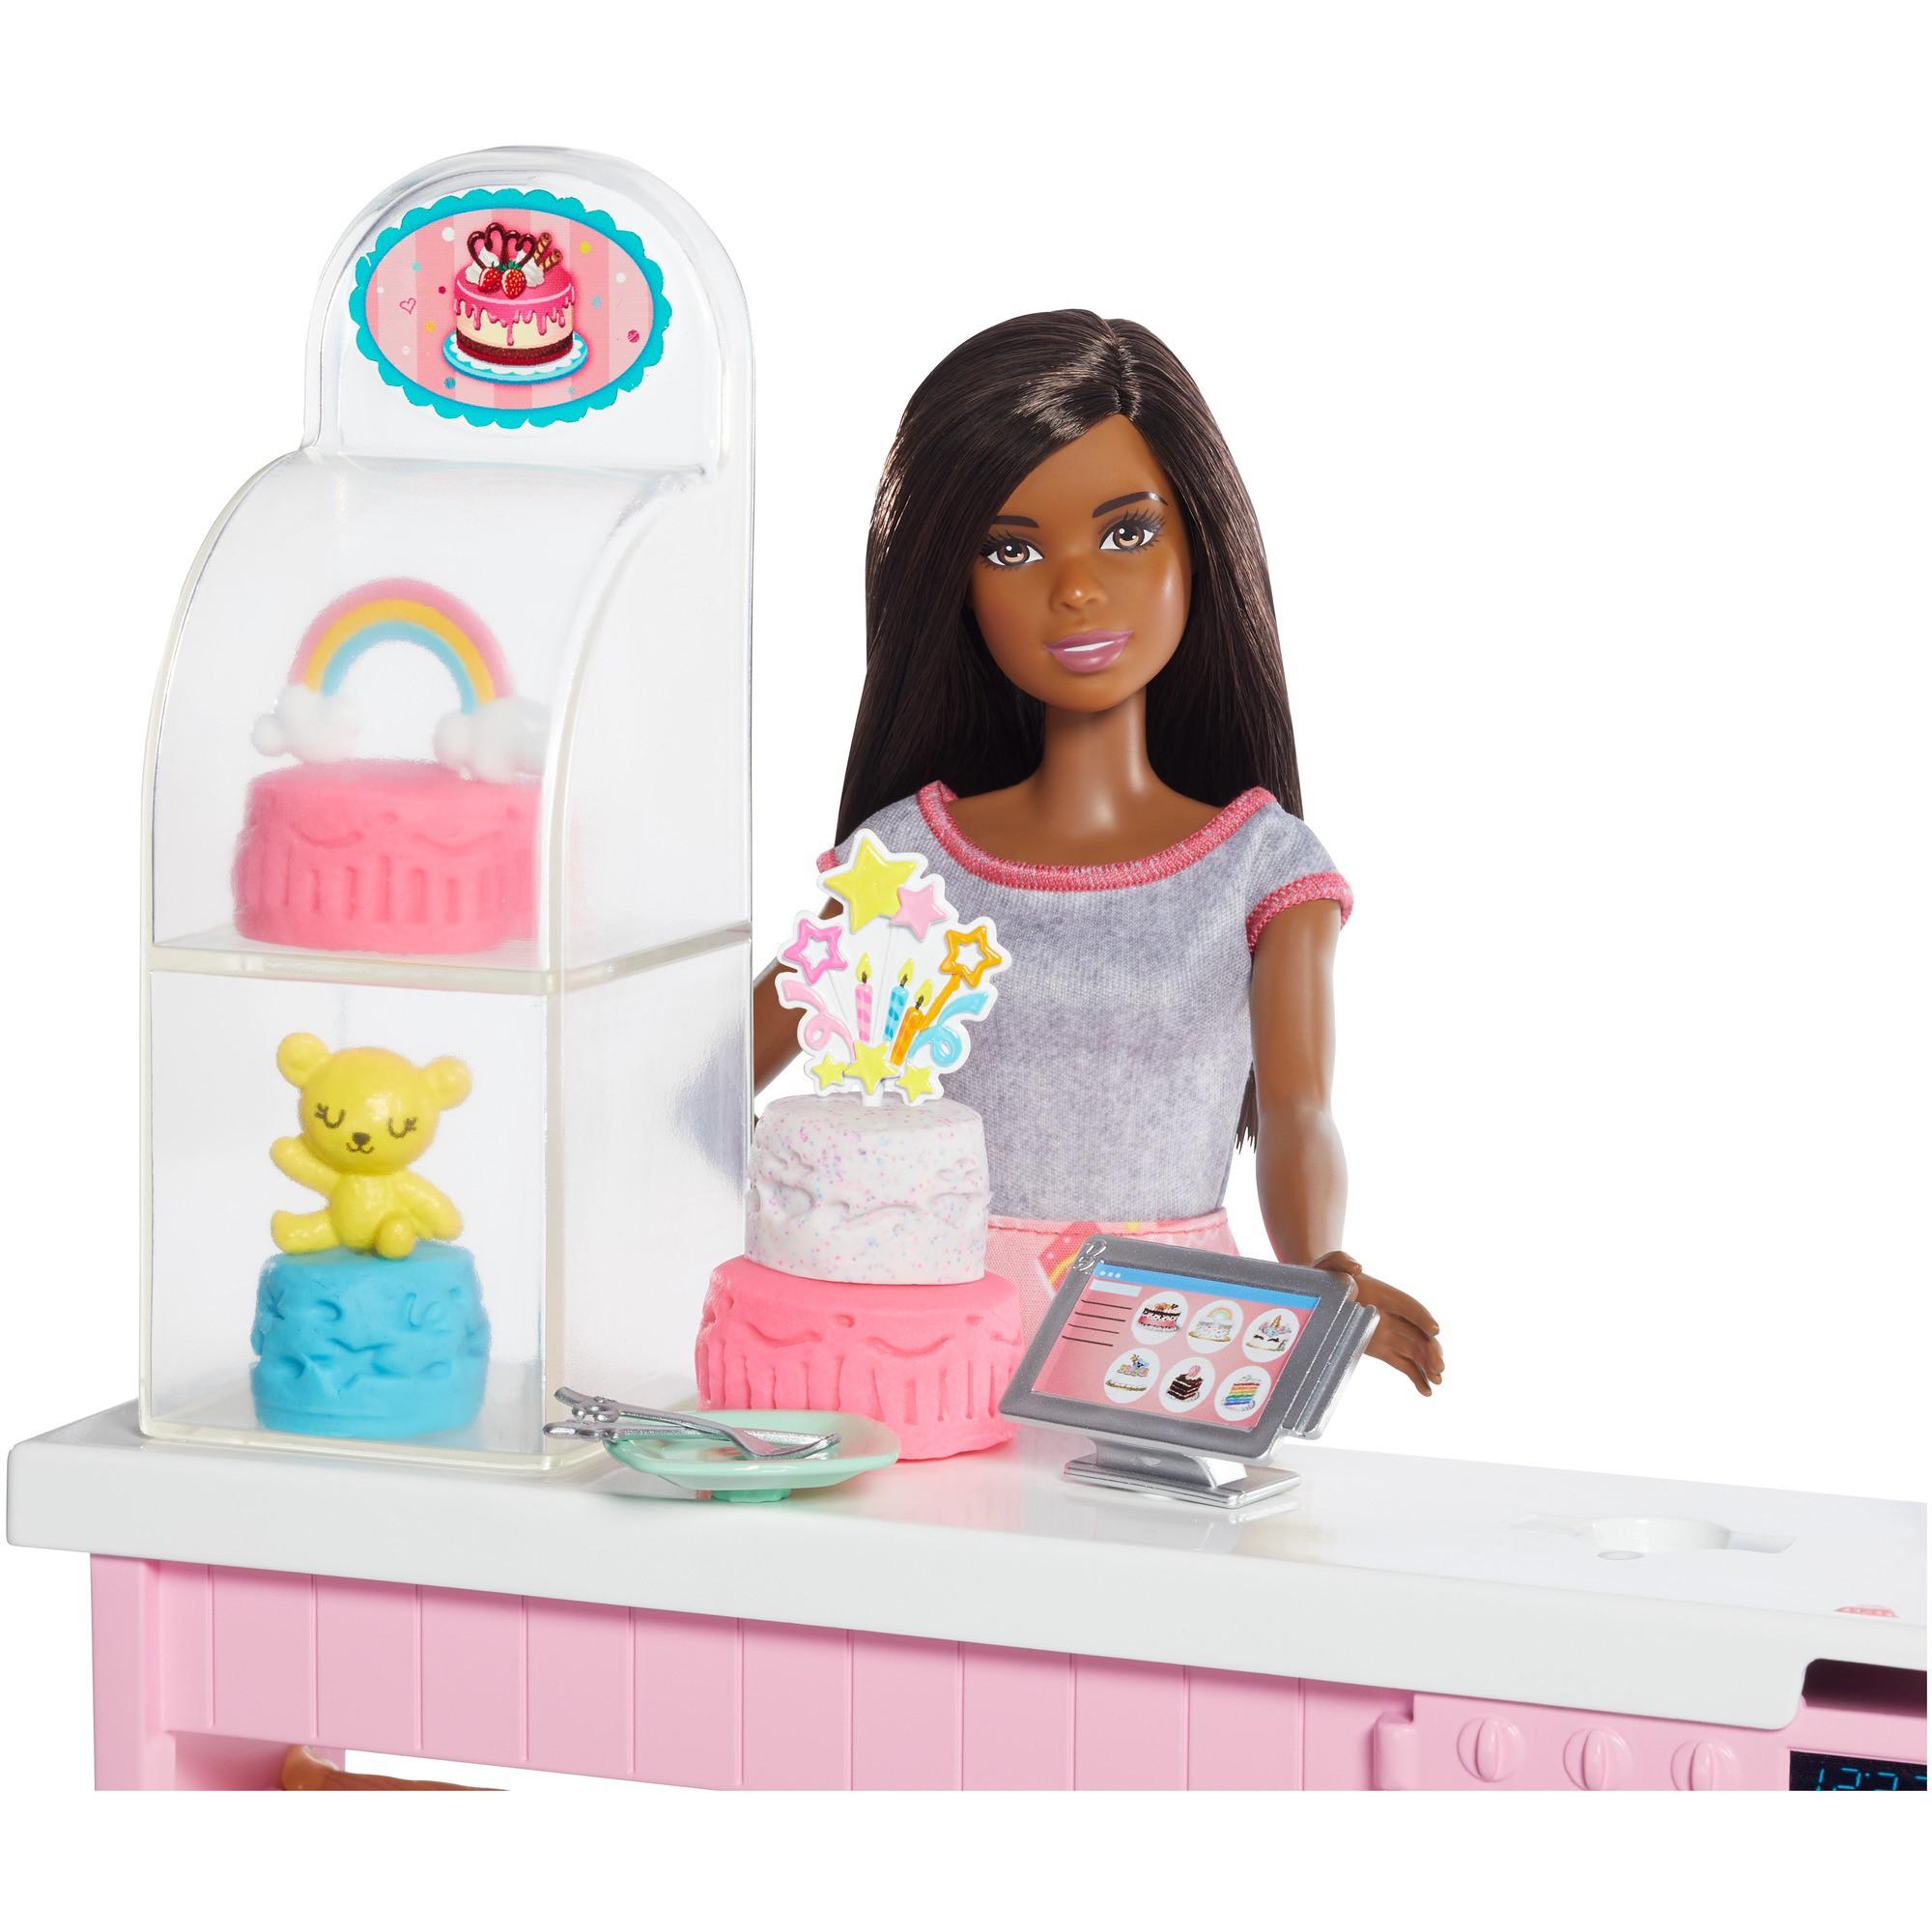 ​​Barbie Cake Decorating Playset with Brunette Doll, Baking Island with Oven, Molding Dough and Toy Icing Pieces for Kids 4 to 7 Years Old​ - image 3 of 16